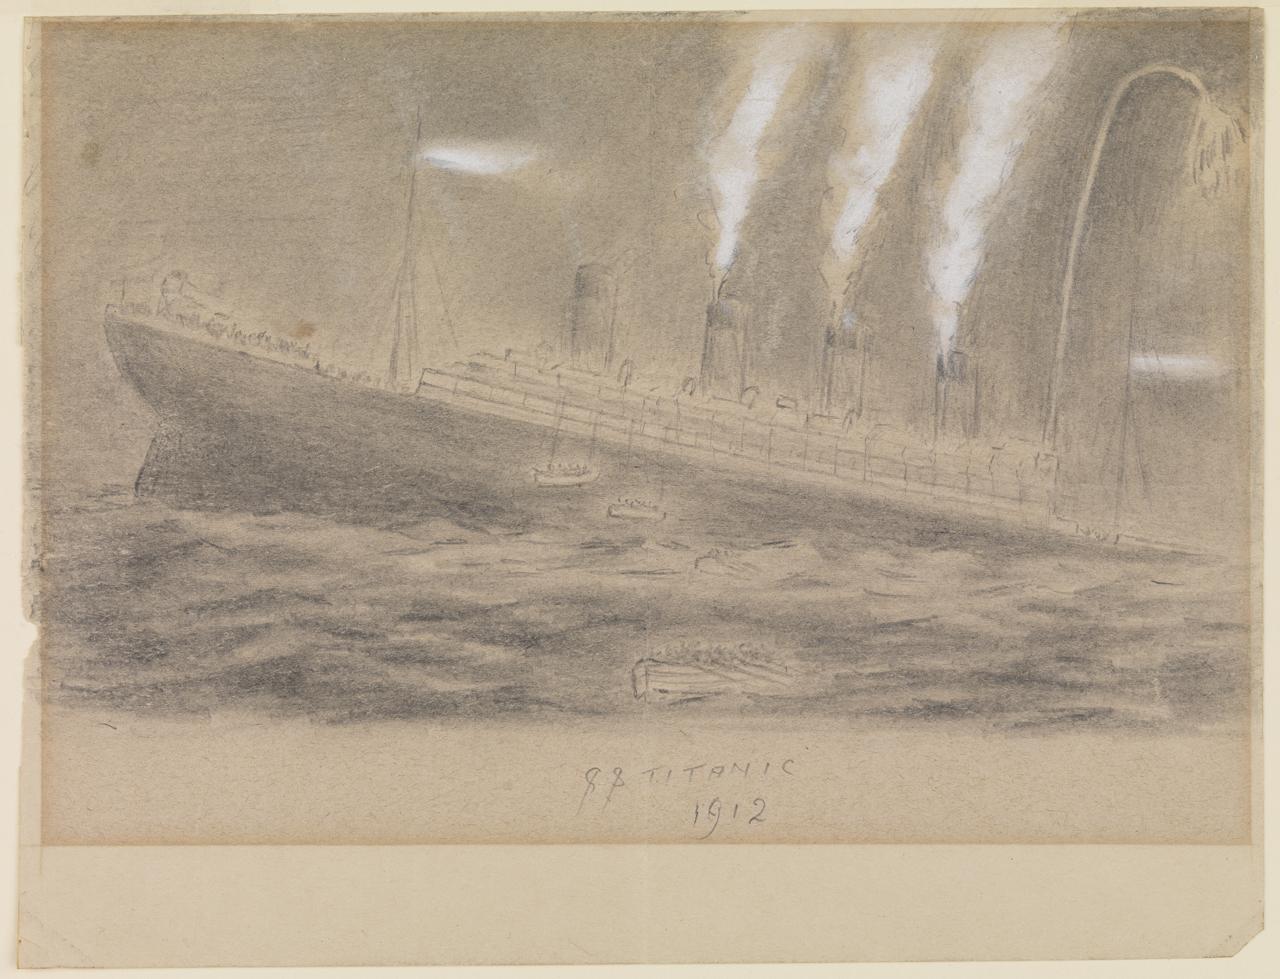 Sketch of the Titanic sinking 